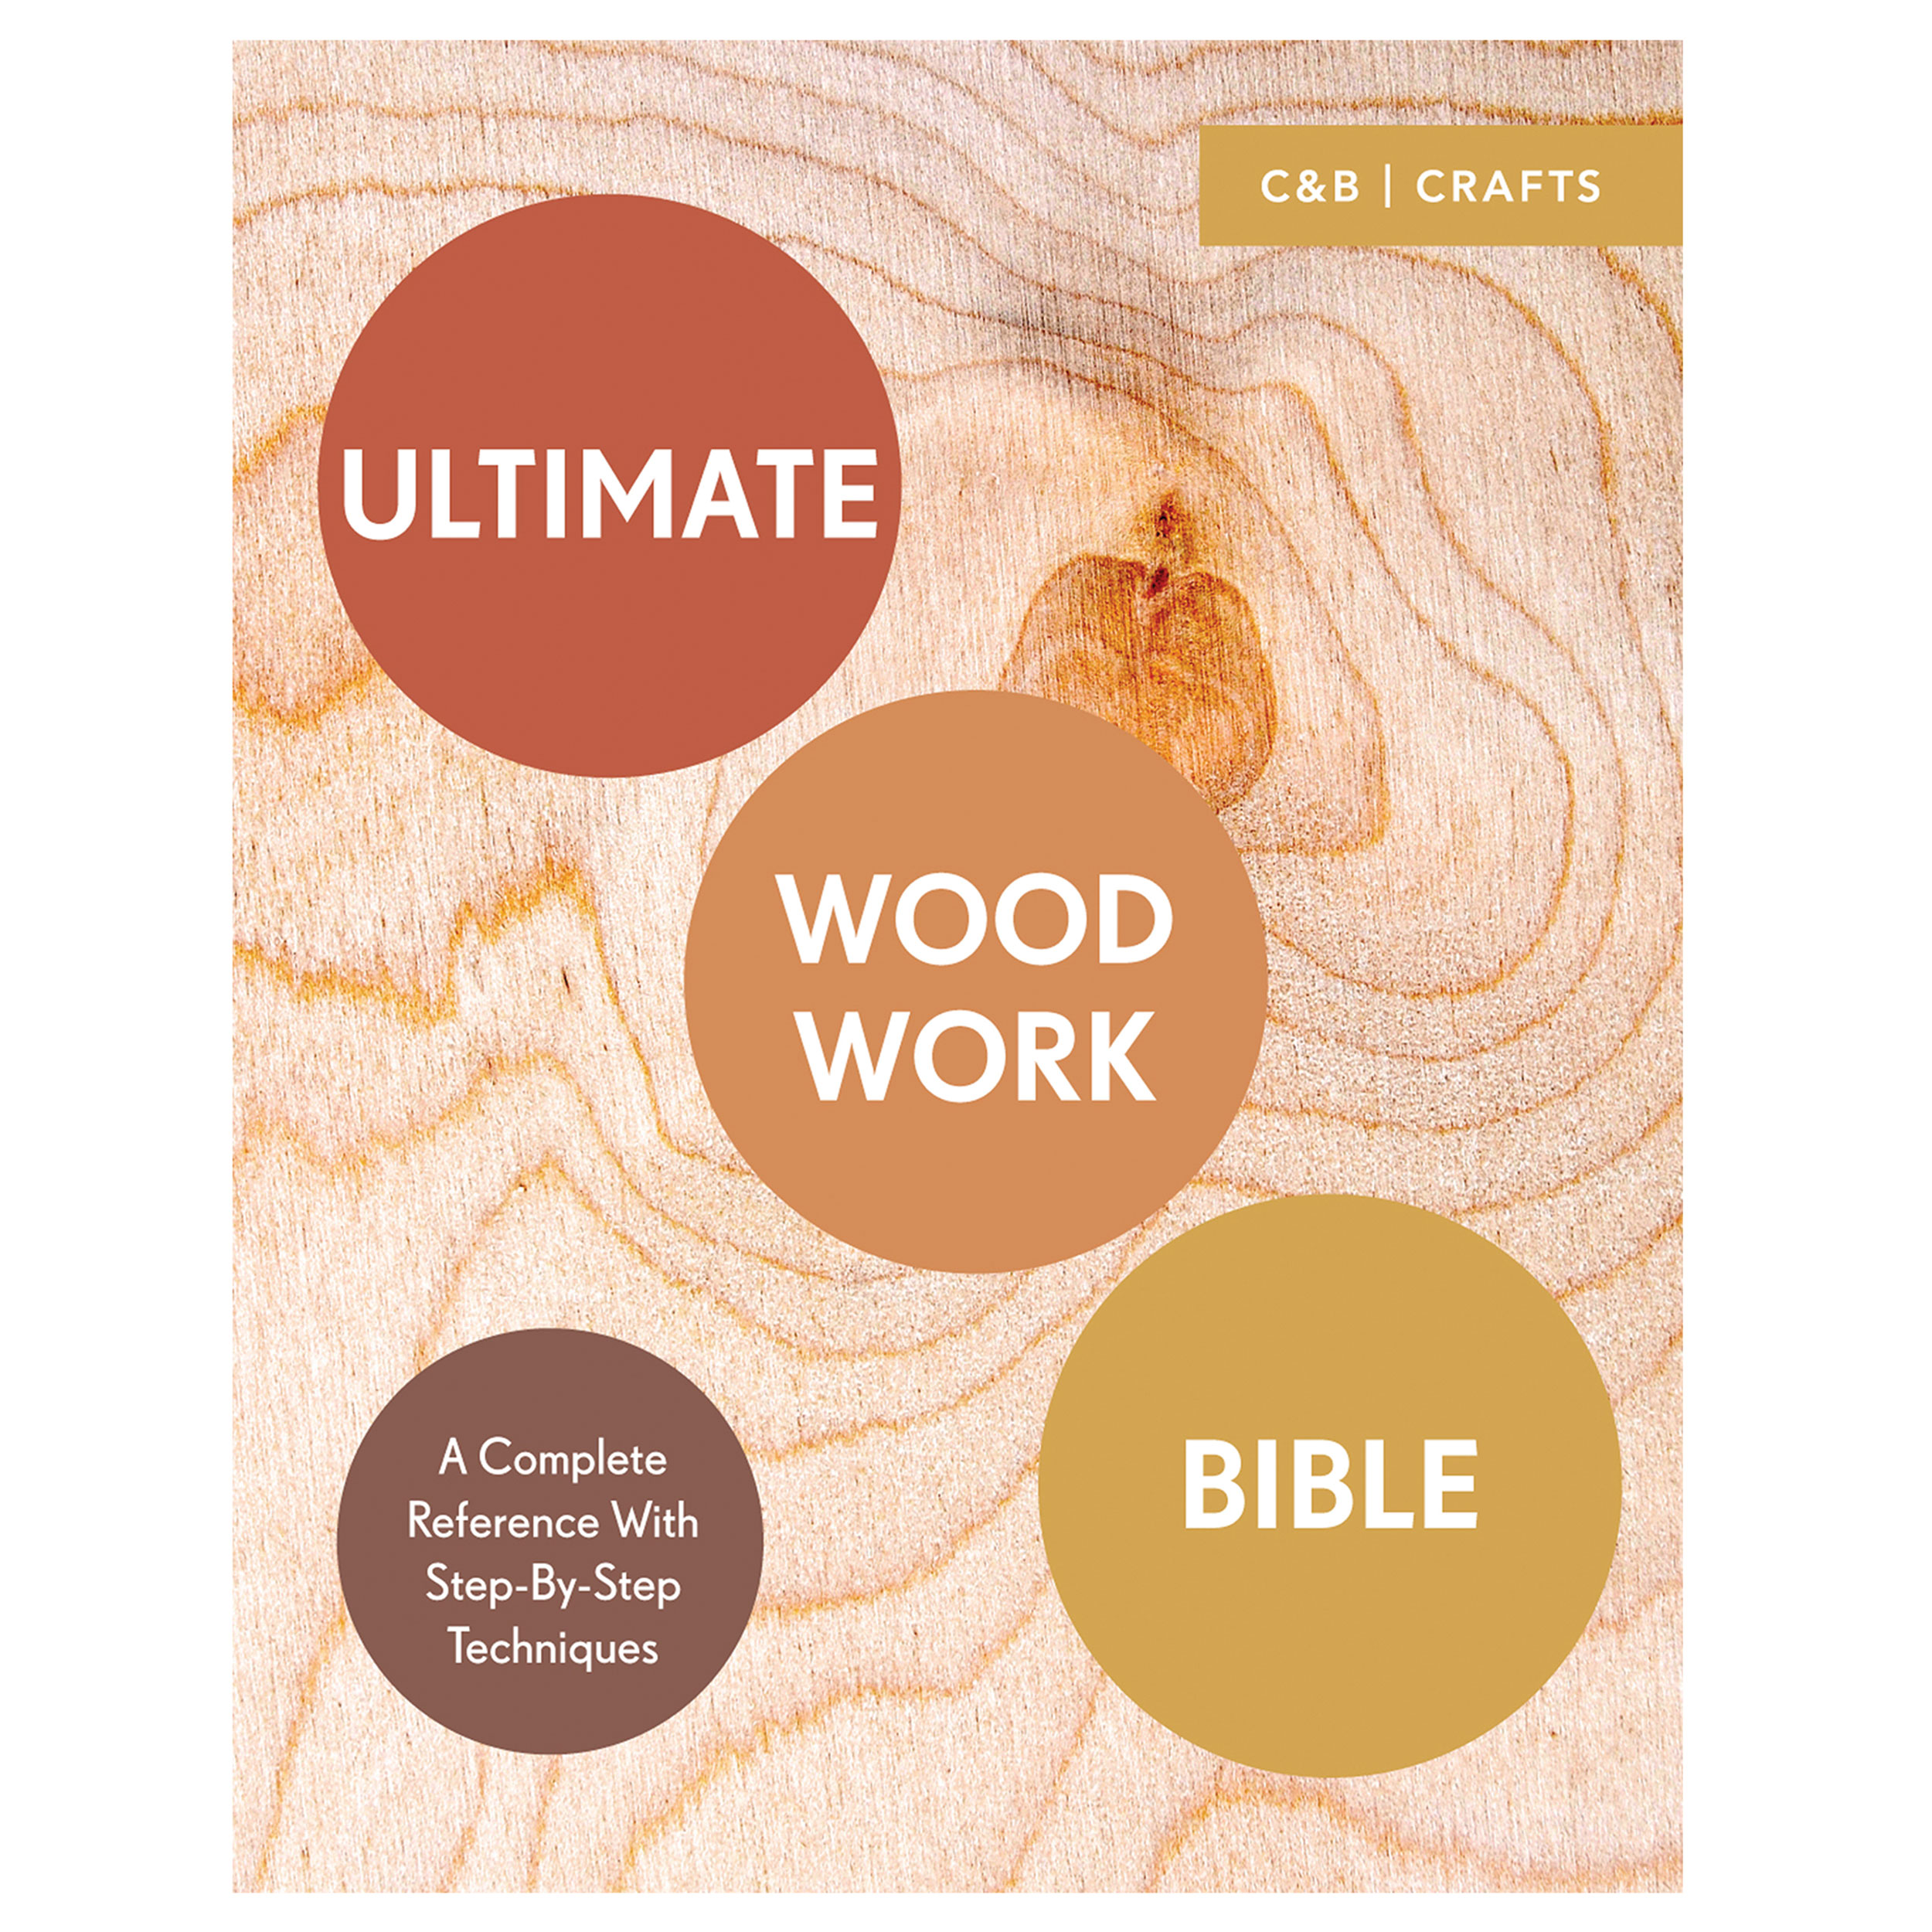 The Wood Work Bible